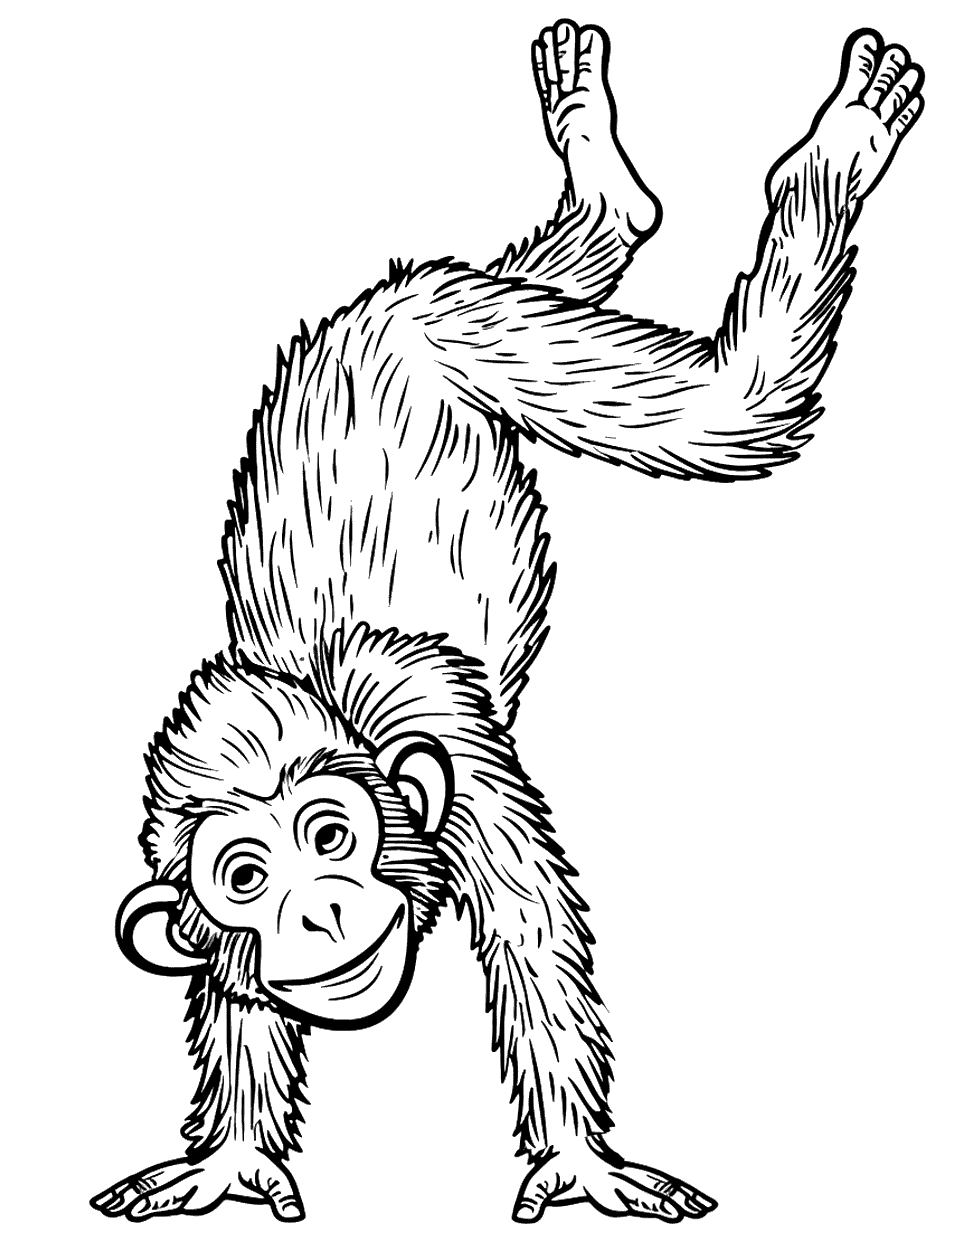 Monkey Doing a Handstand Coloring Page - A playful monkey doing a handstand, feet joyfully in the air.